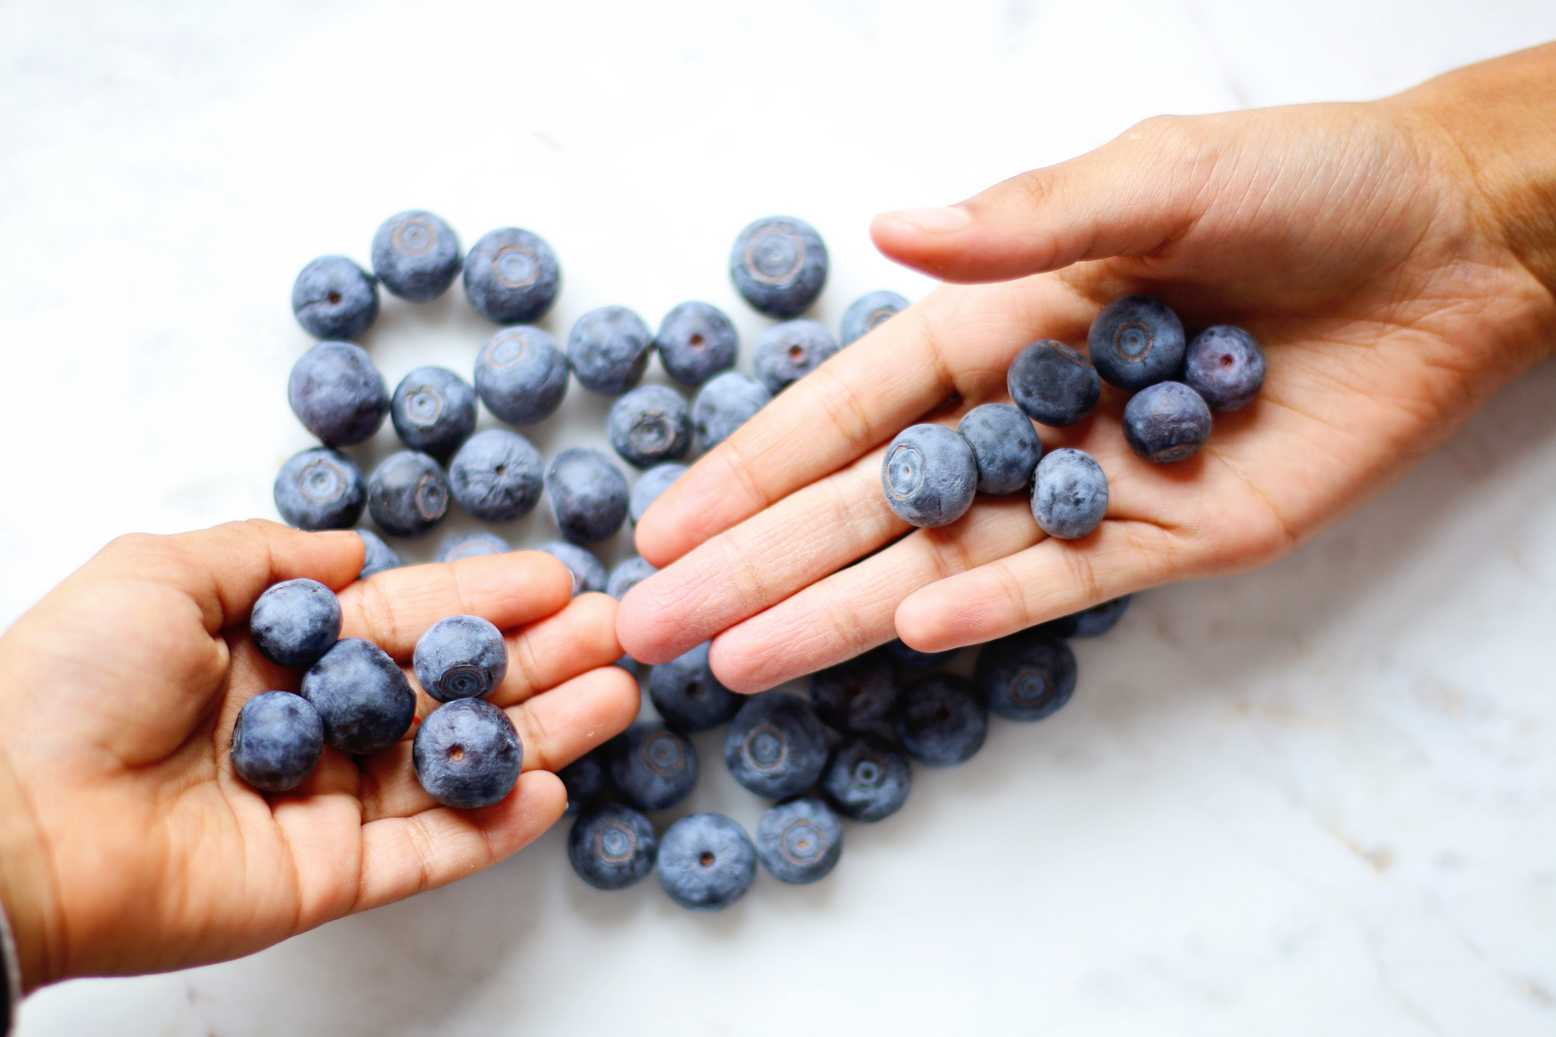 Canva - Two Person's Hand With Blueberries on Top.jpg